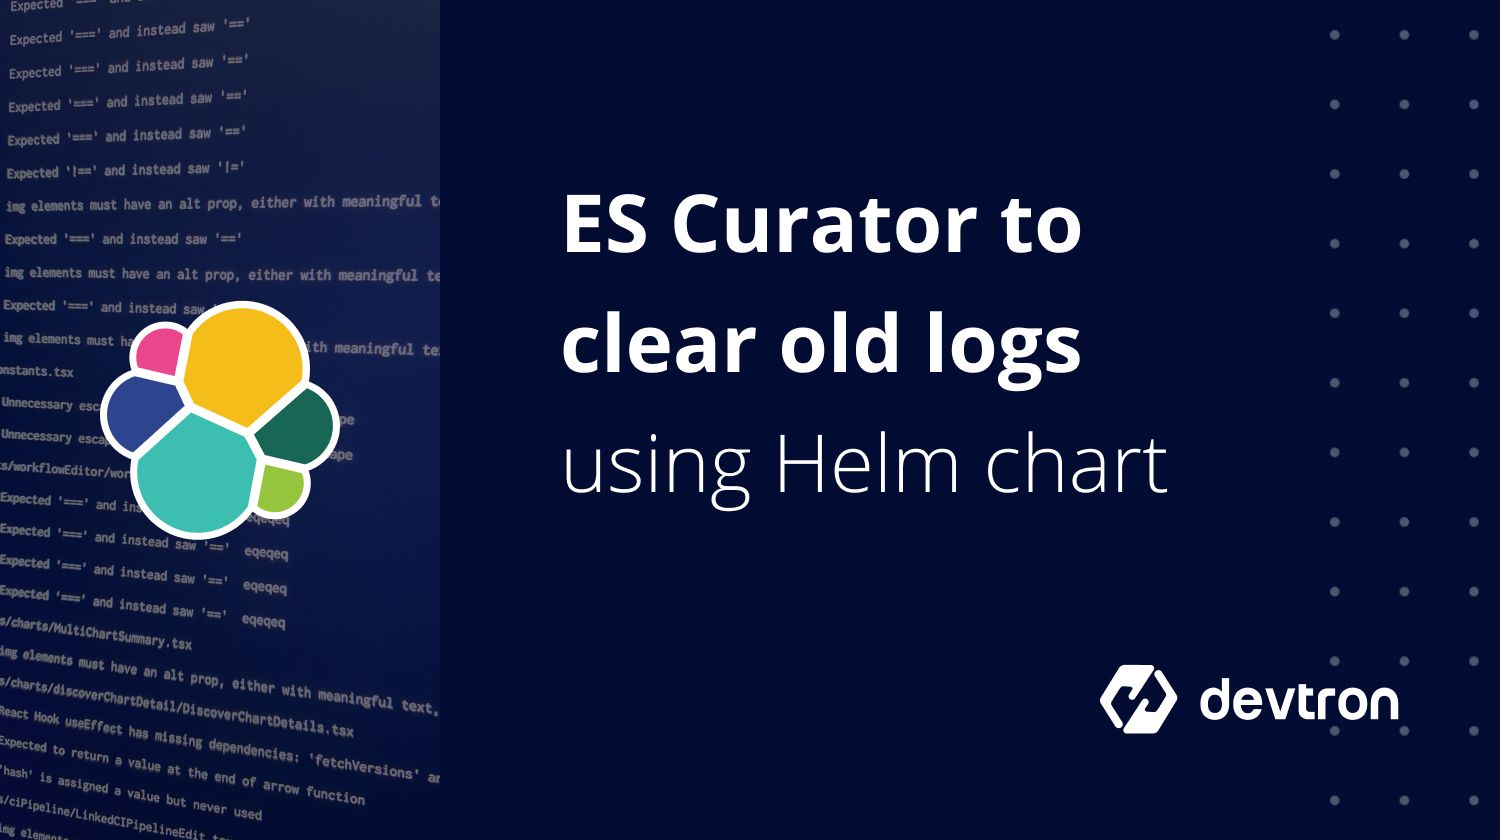 Elastic Search Curator to clear old logs/indices using Helm Chart